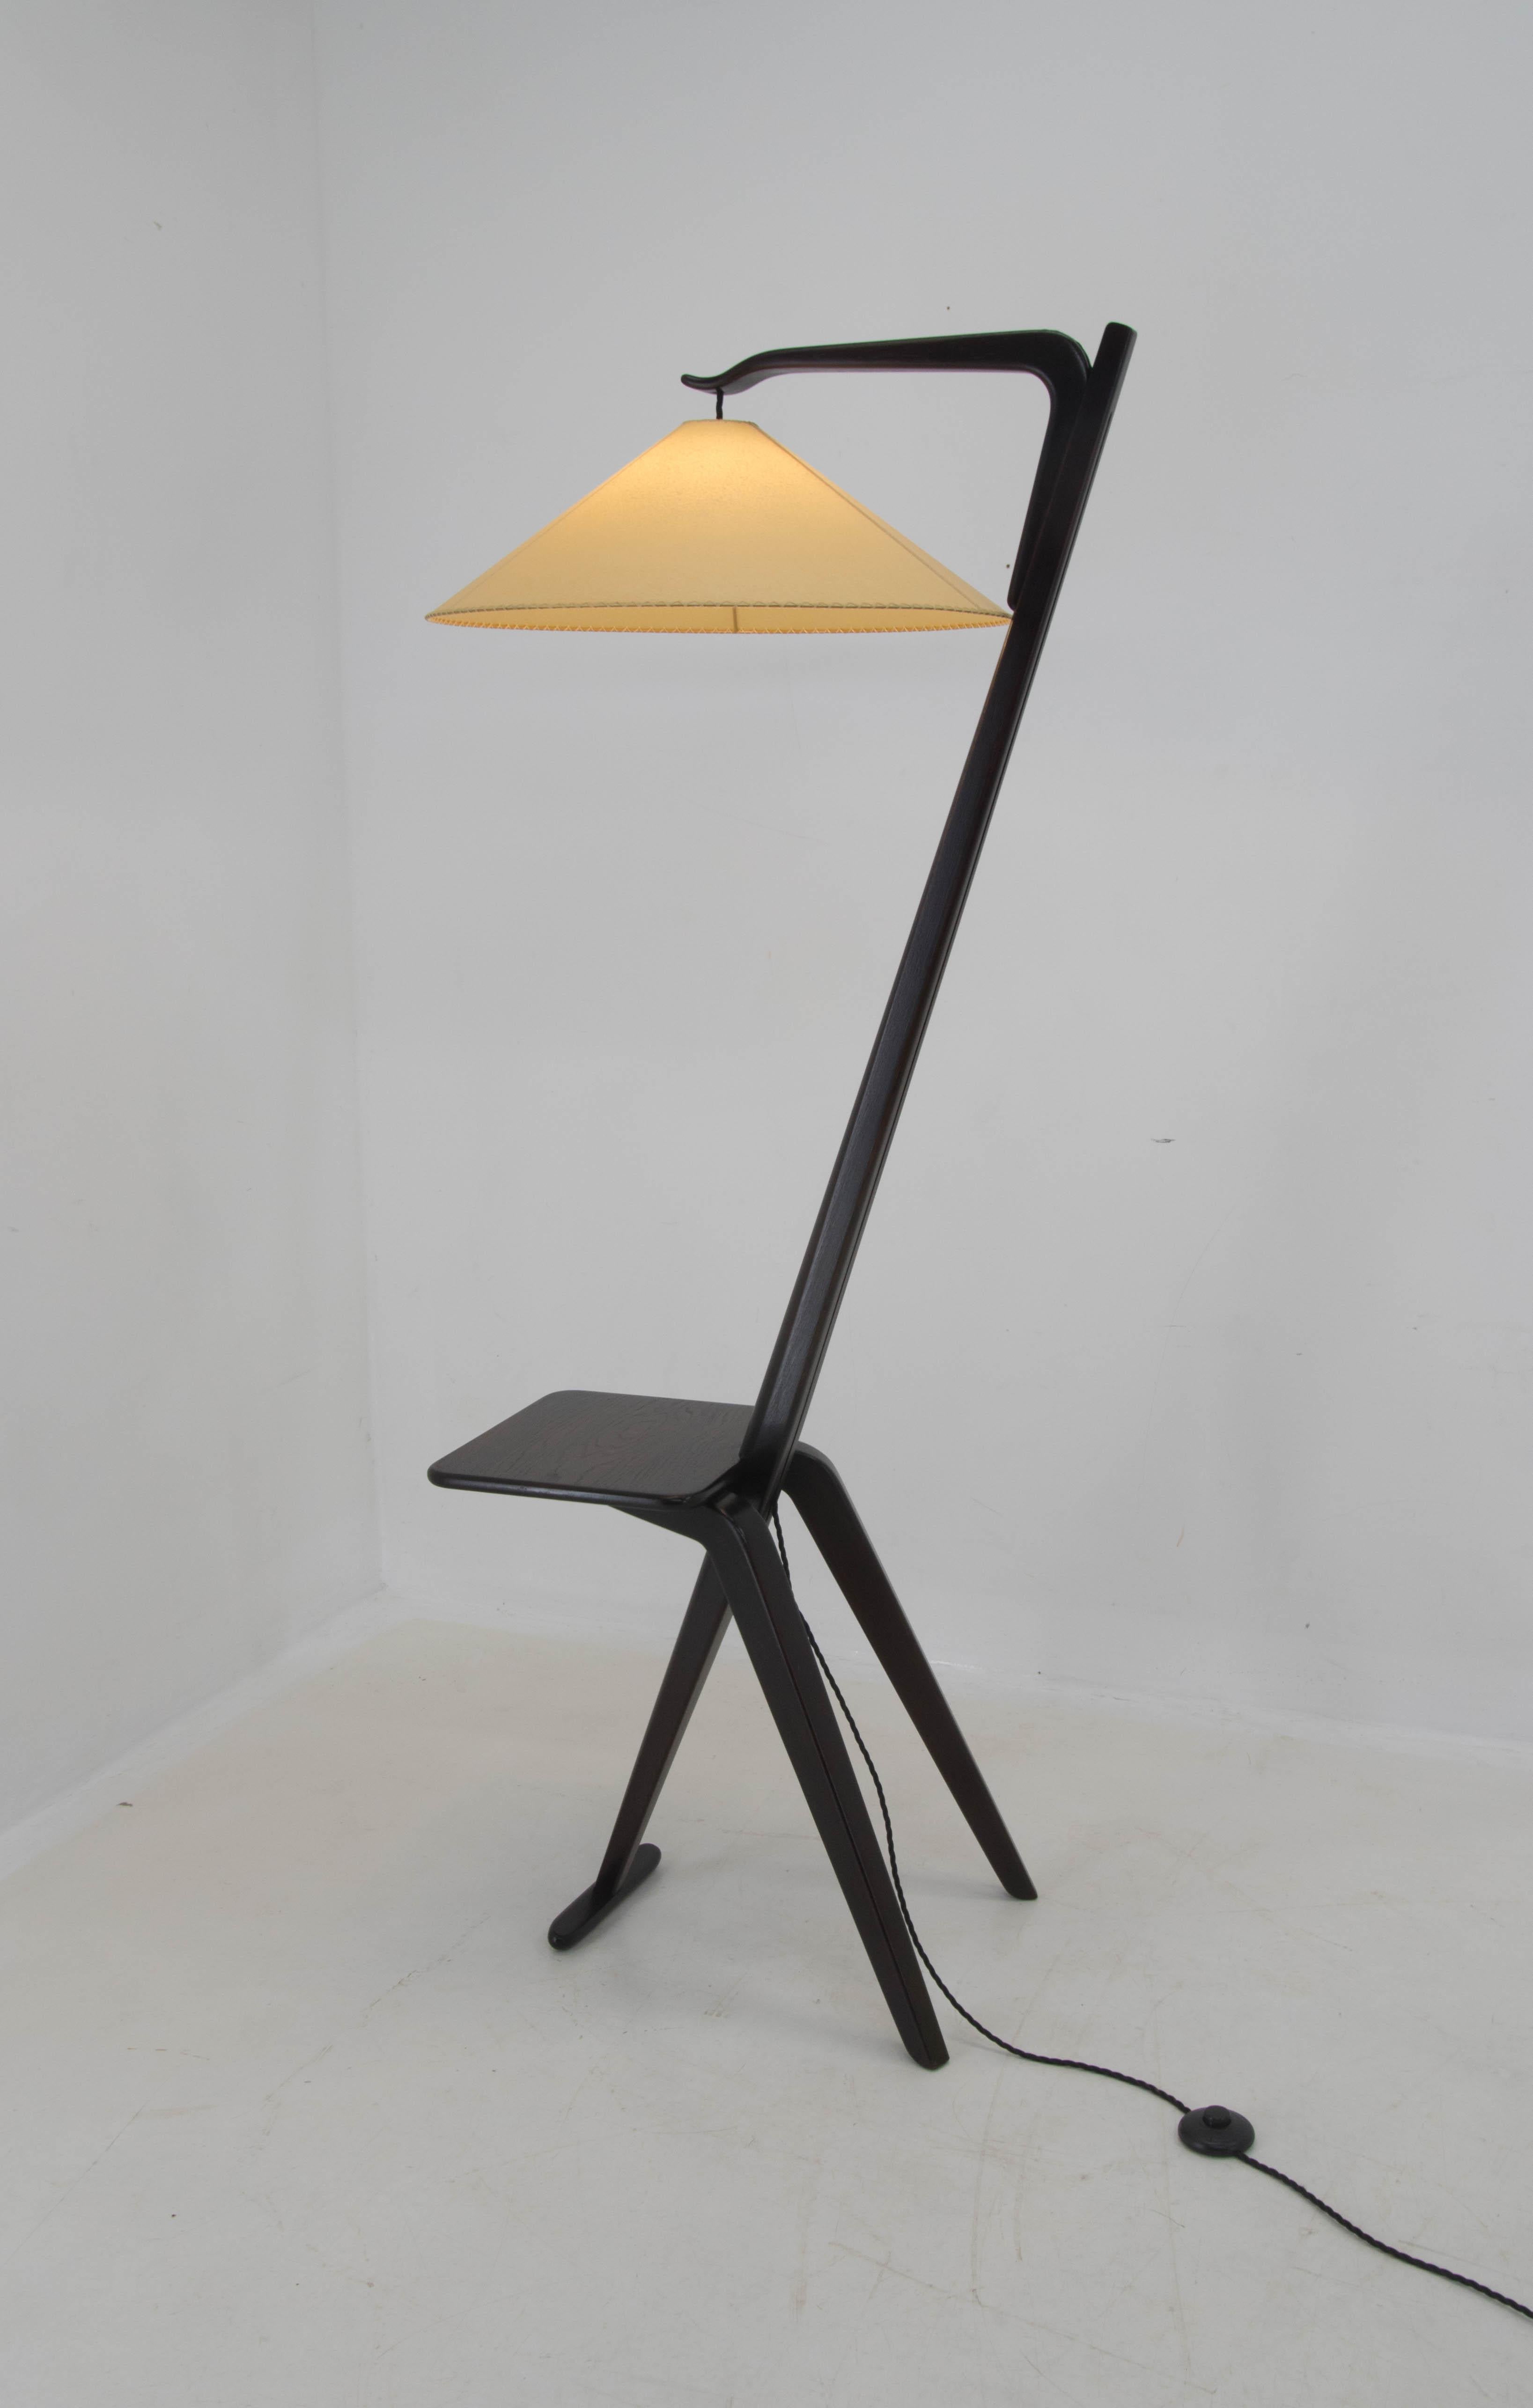 Floor lamp made by ULUV in Czechoslovakia in 1950s.
Completely restored, wood refinished, new parchment paper.
Rewired: 1x60W, E25-E27 bulb
US plug adapter included
Shipping quote to US on request